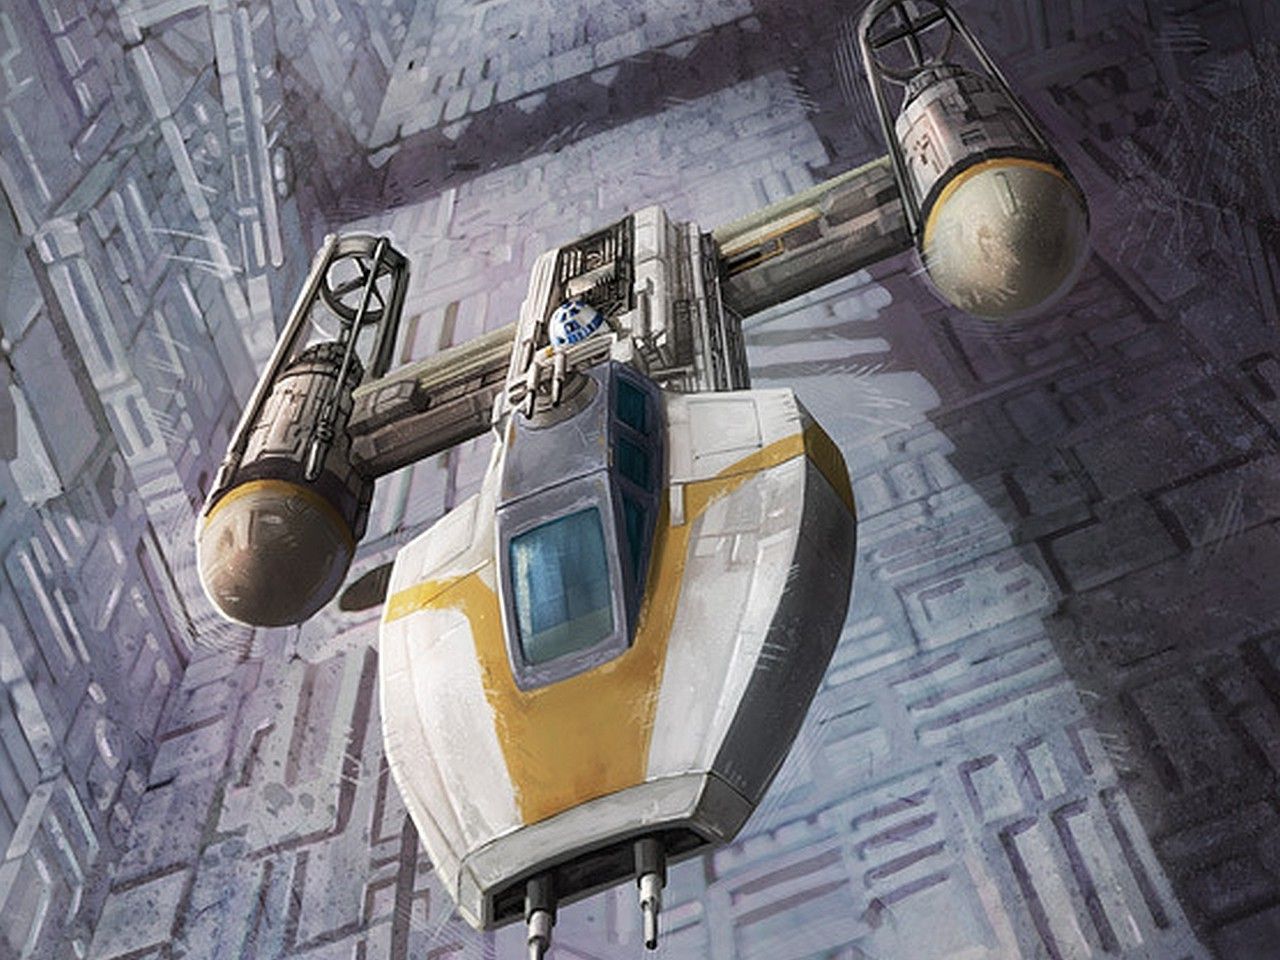 Y Wing Wallpaper. Y Wing Wallpaper, Background Turkey Wing Tips And Y Wing Bomber Wallpaper